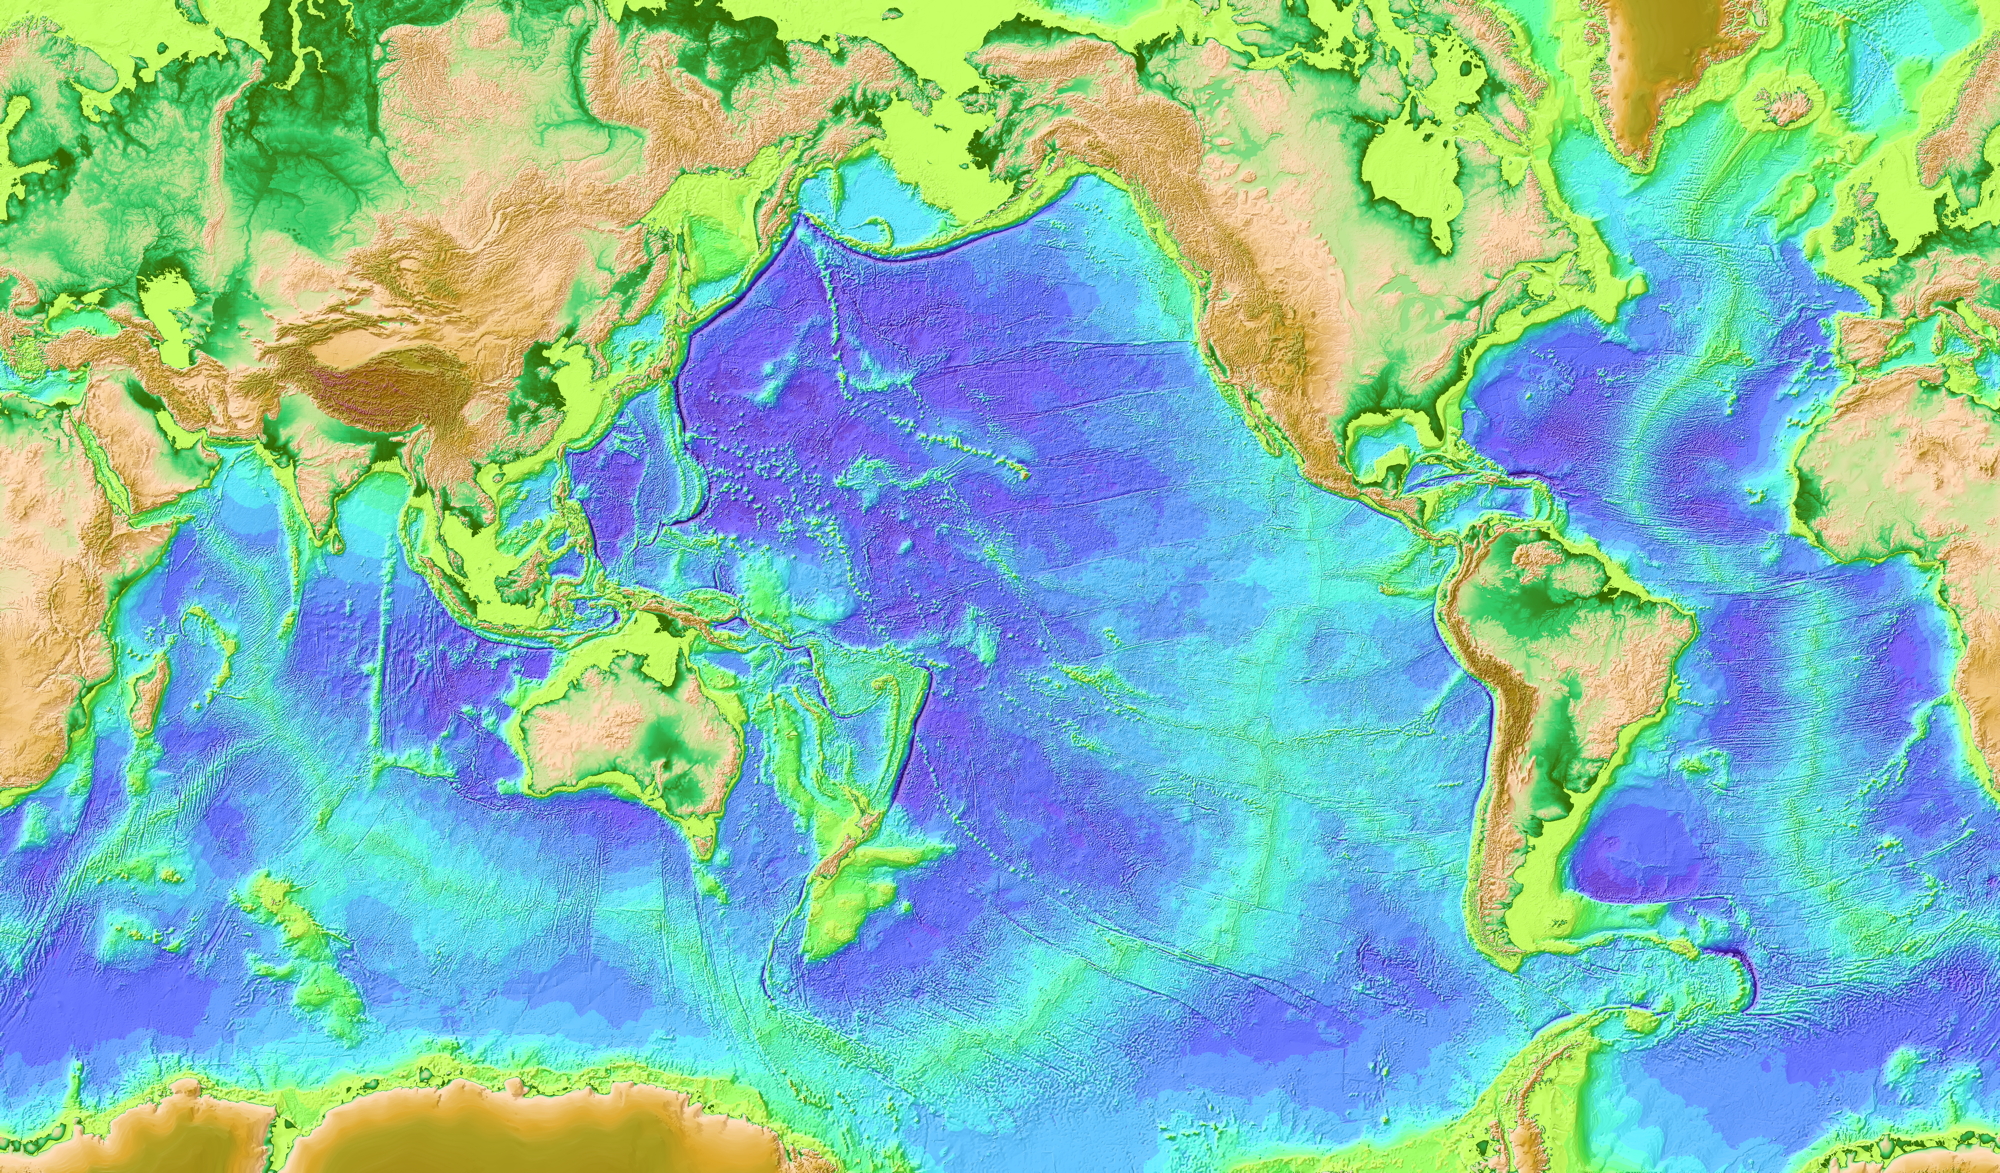 Global Seafloor Topography - measured and estimated from gravity data derived from satellite altimetry and shipboard depth soundings